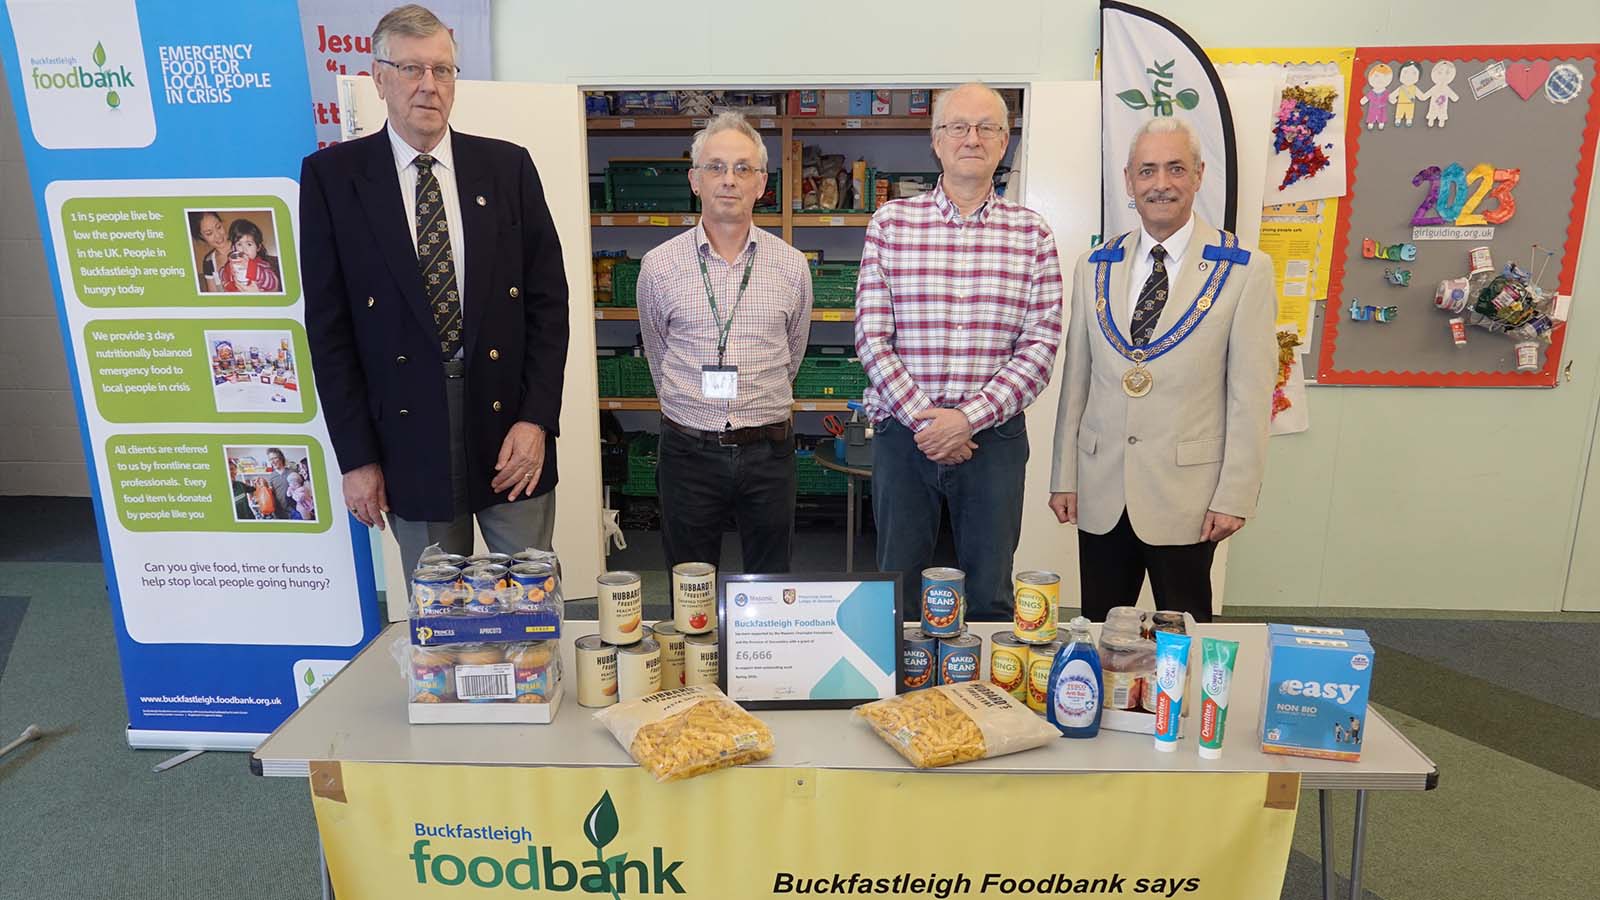 left to right: W Bro Clive Eden (Communications Officer Devonshire), Kevin Mitchell (Foodbank Manager), Richard Blight (Foodbank Volunteer), W Bro Andy Vodden (Assistant Provincial Grand Master Devonshire)